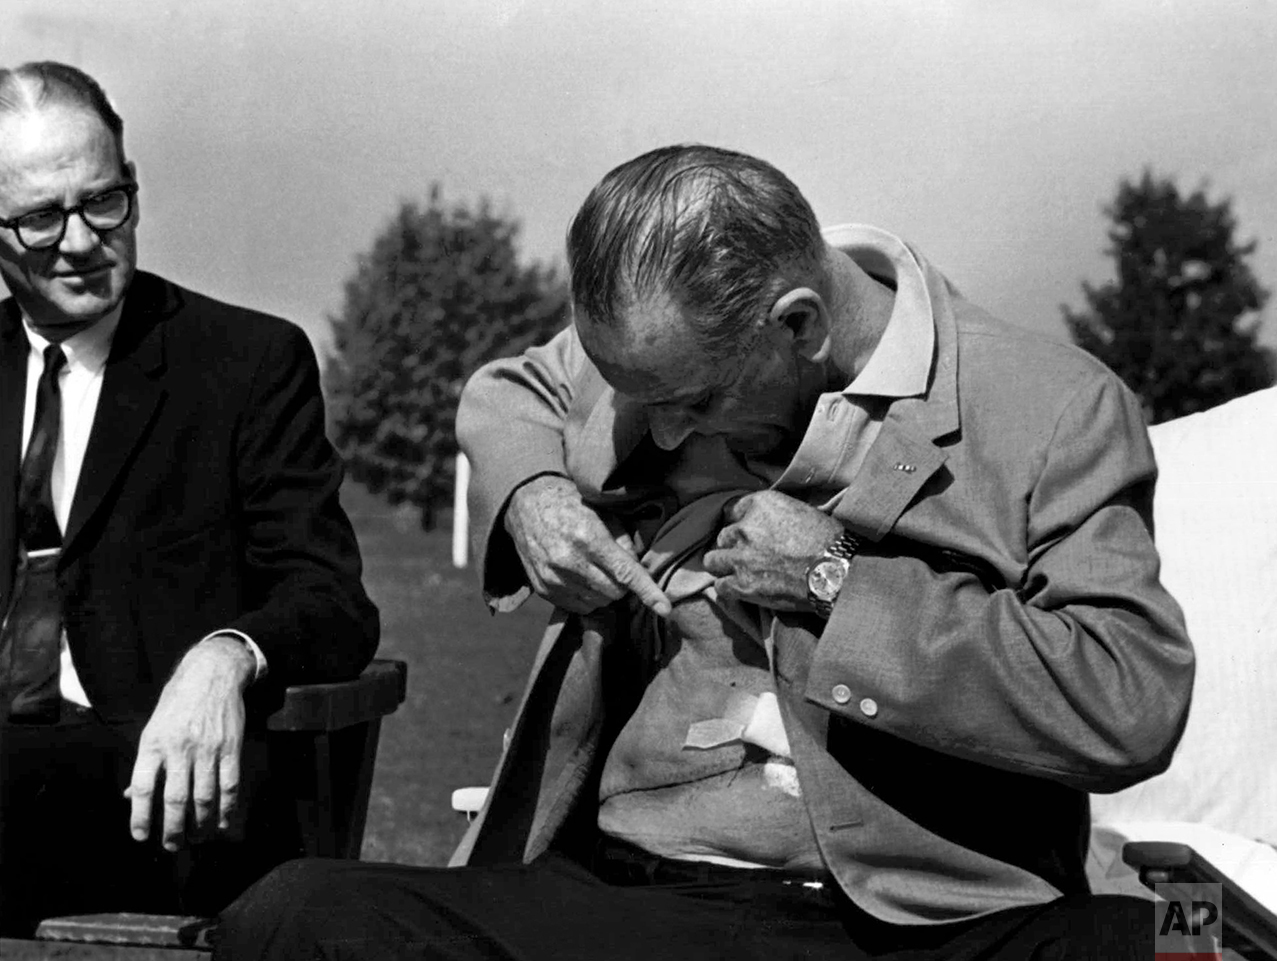  U.S. President Lyndon Baines Johnson displays the incision from his gall bladder surgery and kidney stone removal at a news conference at Bethesda Naval Hospital in Washington Oct. 20, 1965. (AP Photo/Charles Tasnadi) 